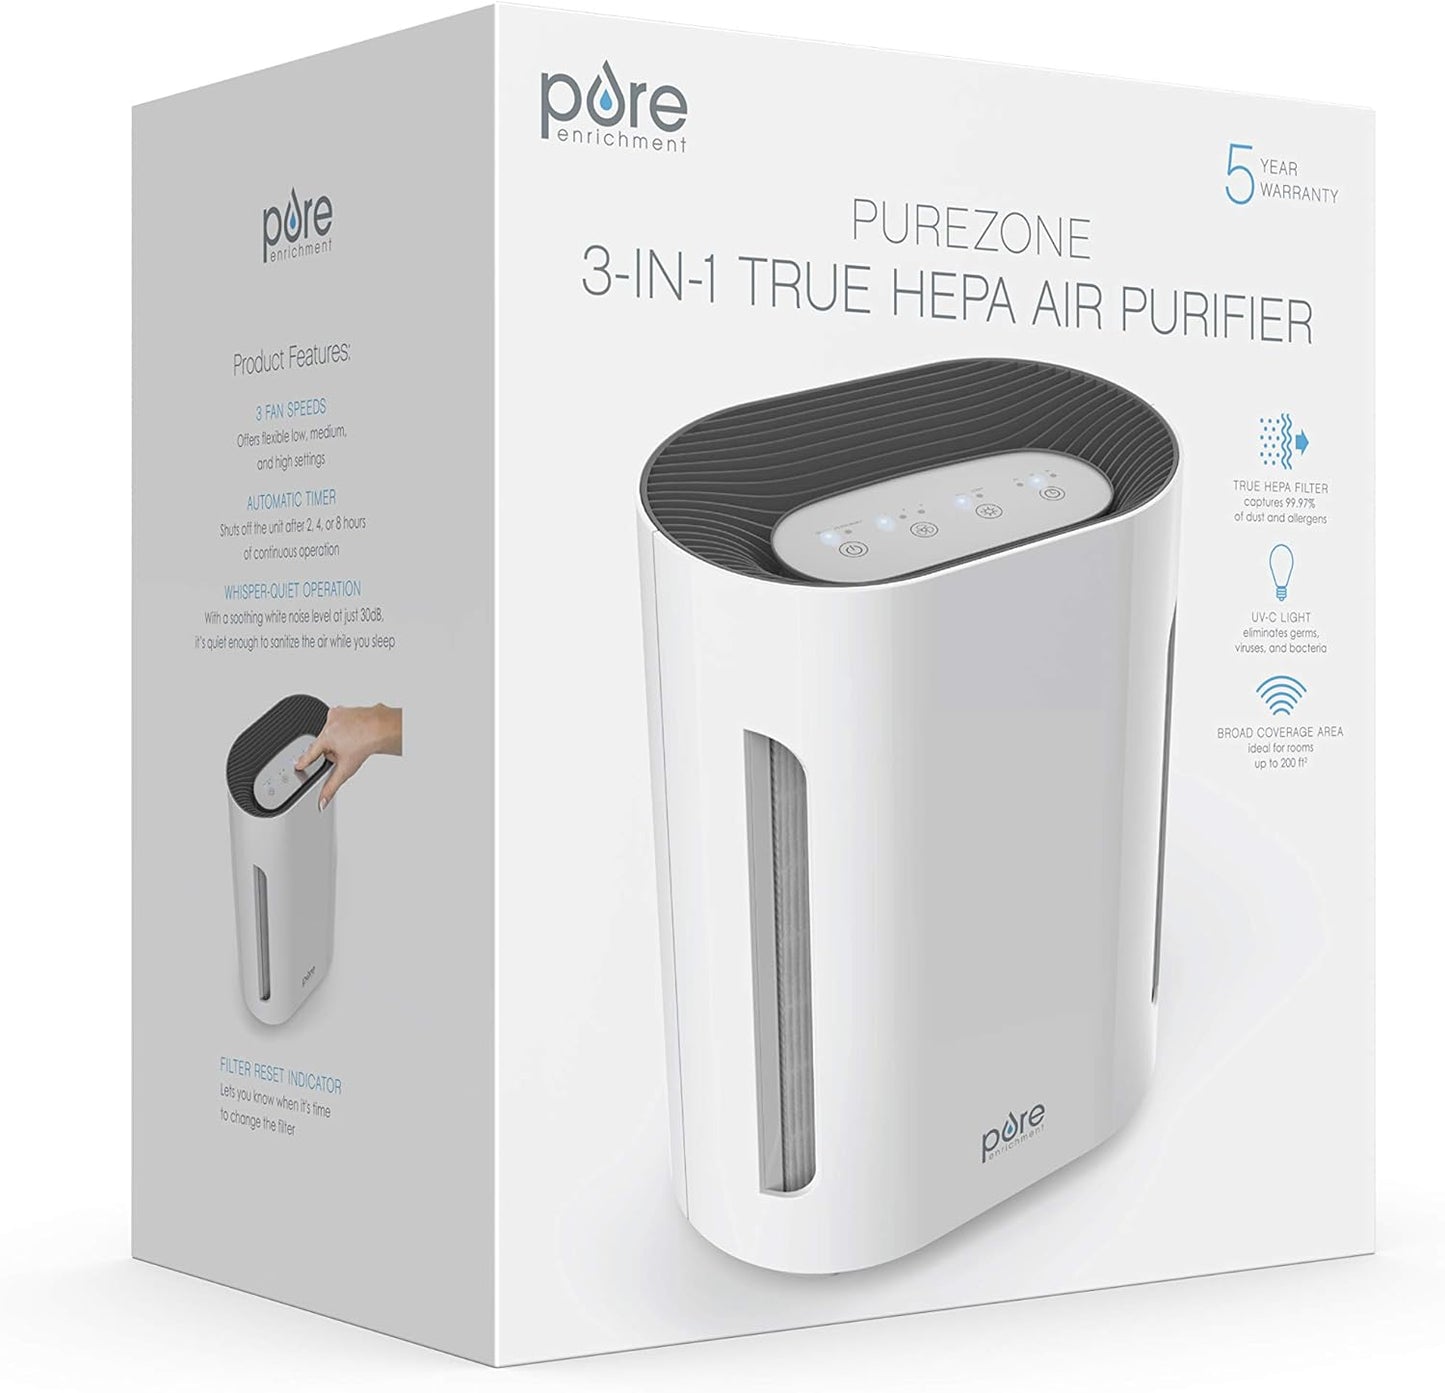 Pure Enrichment PureZone 3-in-1 Air Purifier Bundle with True HEPA Replacement Filter - True HEPA Filter & UV-C Cleans Air, Helps Alleviate Allergies, Removes Pet Hair, Smoke & More